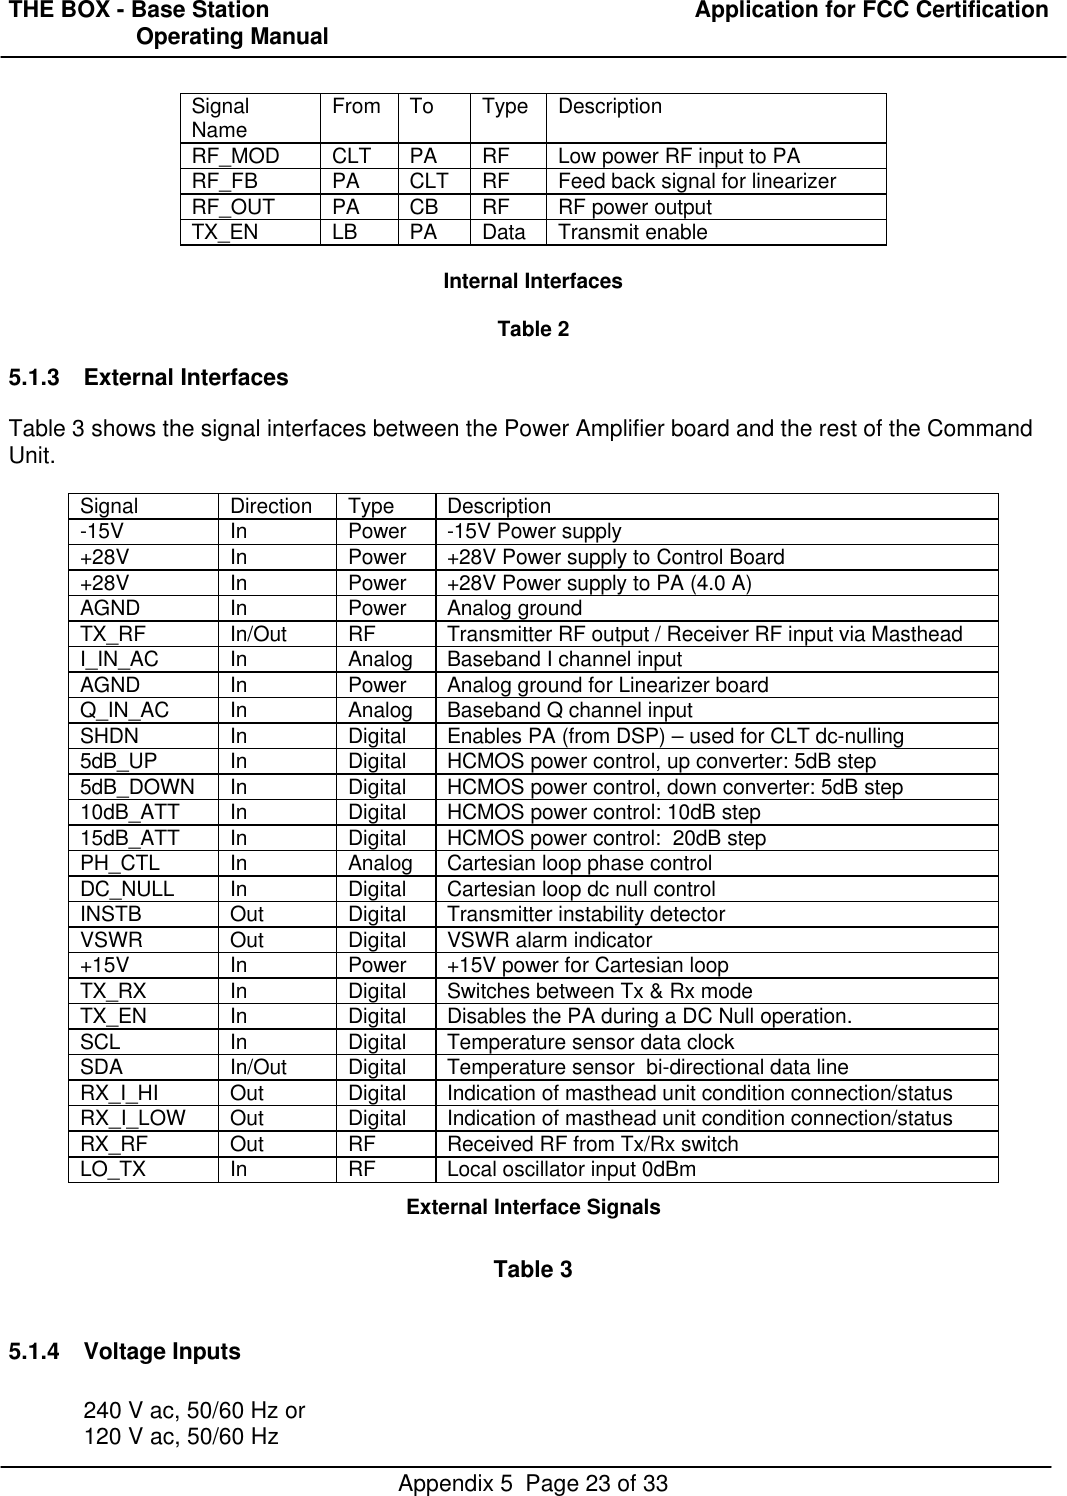 THE BOX - Base Station  Application for FCC Certification                    Operating ManualAppendix 5  Page 23 of 33SignalName From To Type DescriptionRF_MOD CLT PA RF Low power RF input to PARF_FB PA CLT RF Feed back signal for linearizerRF_OUT PA CB RF RF power outputTX_EN LB PA Data Transmit enableInternal InterfacesTable 25.1.3 External InterfacesTable 3 shows the signal interfaces between the Power Amplifier board and the rest of the CommandUnit.Signal Direction Type Description-15V In Power -15V Power supply+28V In Power +28V Power supply to Control Board+28V In Power +28V Power supply to PA (4.0 A)AGND In Power Analog groundTX_RF In/Out RF Transmitter RF output / Receiver RF input via MastheadI_IN_AC In Analog Baseband I channel inputAGND In Power Analog ground for Linearizer boardQ_IN_AC In Analog Baseband Q channel inputSHDN In Digital Enables PA (from DSP) – used for CLT dc-nulling5dB_UP In Digital HCMOS power control, up converter: 5dB step5dB_DOWN In Digital HCMOS power control, down converter: 5dB step10dB_ATT In Digital HCMOS power control: 10dB step15dB_ATT In Digital HCMOS power control:  20dB stepPH_CTL In Analog Cartesian loop phase controlDC_NULL In Digital Cartesian loop dc null controlINSTB Out Digital Transmitter instability detectorVSWR Out Digital VSWR alarm indicator+15V In Power +15V power for Cartesian loopTX_RX In Digital Switches between Tx &amp; Rx modeTX_EN In Digital Disables the PA during a DC Null operation.SCL In Digital Temperature sensor data clockSDA In/Out Digital Temperature sensor  bi-directional data lineRX_I_HI Out Digital Indication of masthead unit condition connection/statusRX_I_LOW Out Digital Indication of masthead unit condition connection/statusRX_RF Out RF Received RF from Tx/Rx switchLO_TX In RF Local oscillator input 0dBmExternal Interface SignalsTable 35.1.4 Voltage Inputs240 V ac, 50/60 Hz or120 V ac, 50/60 Hz